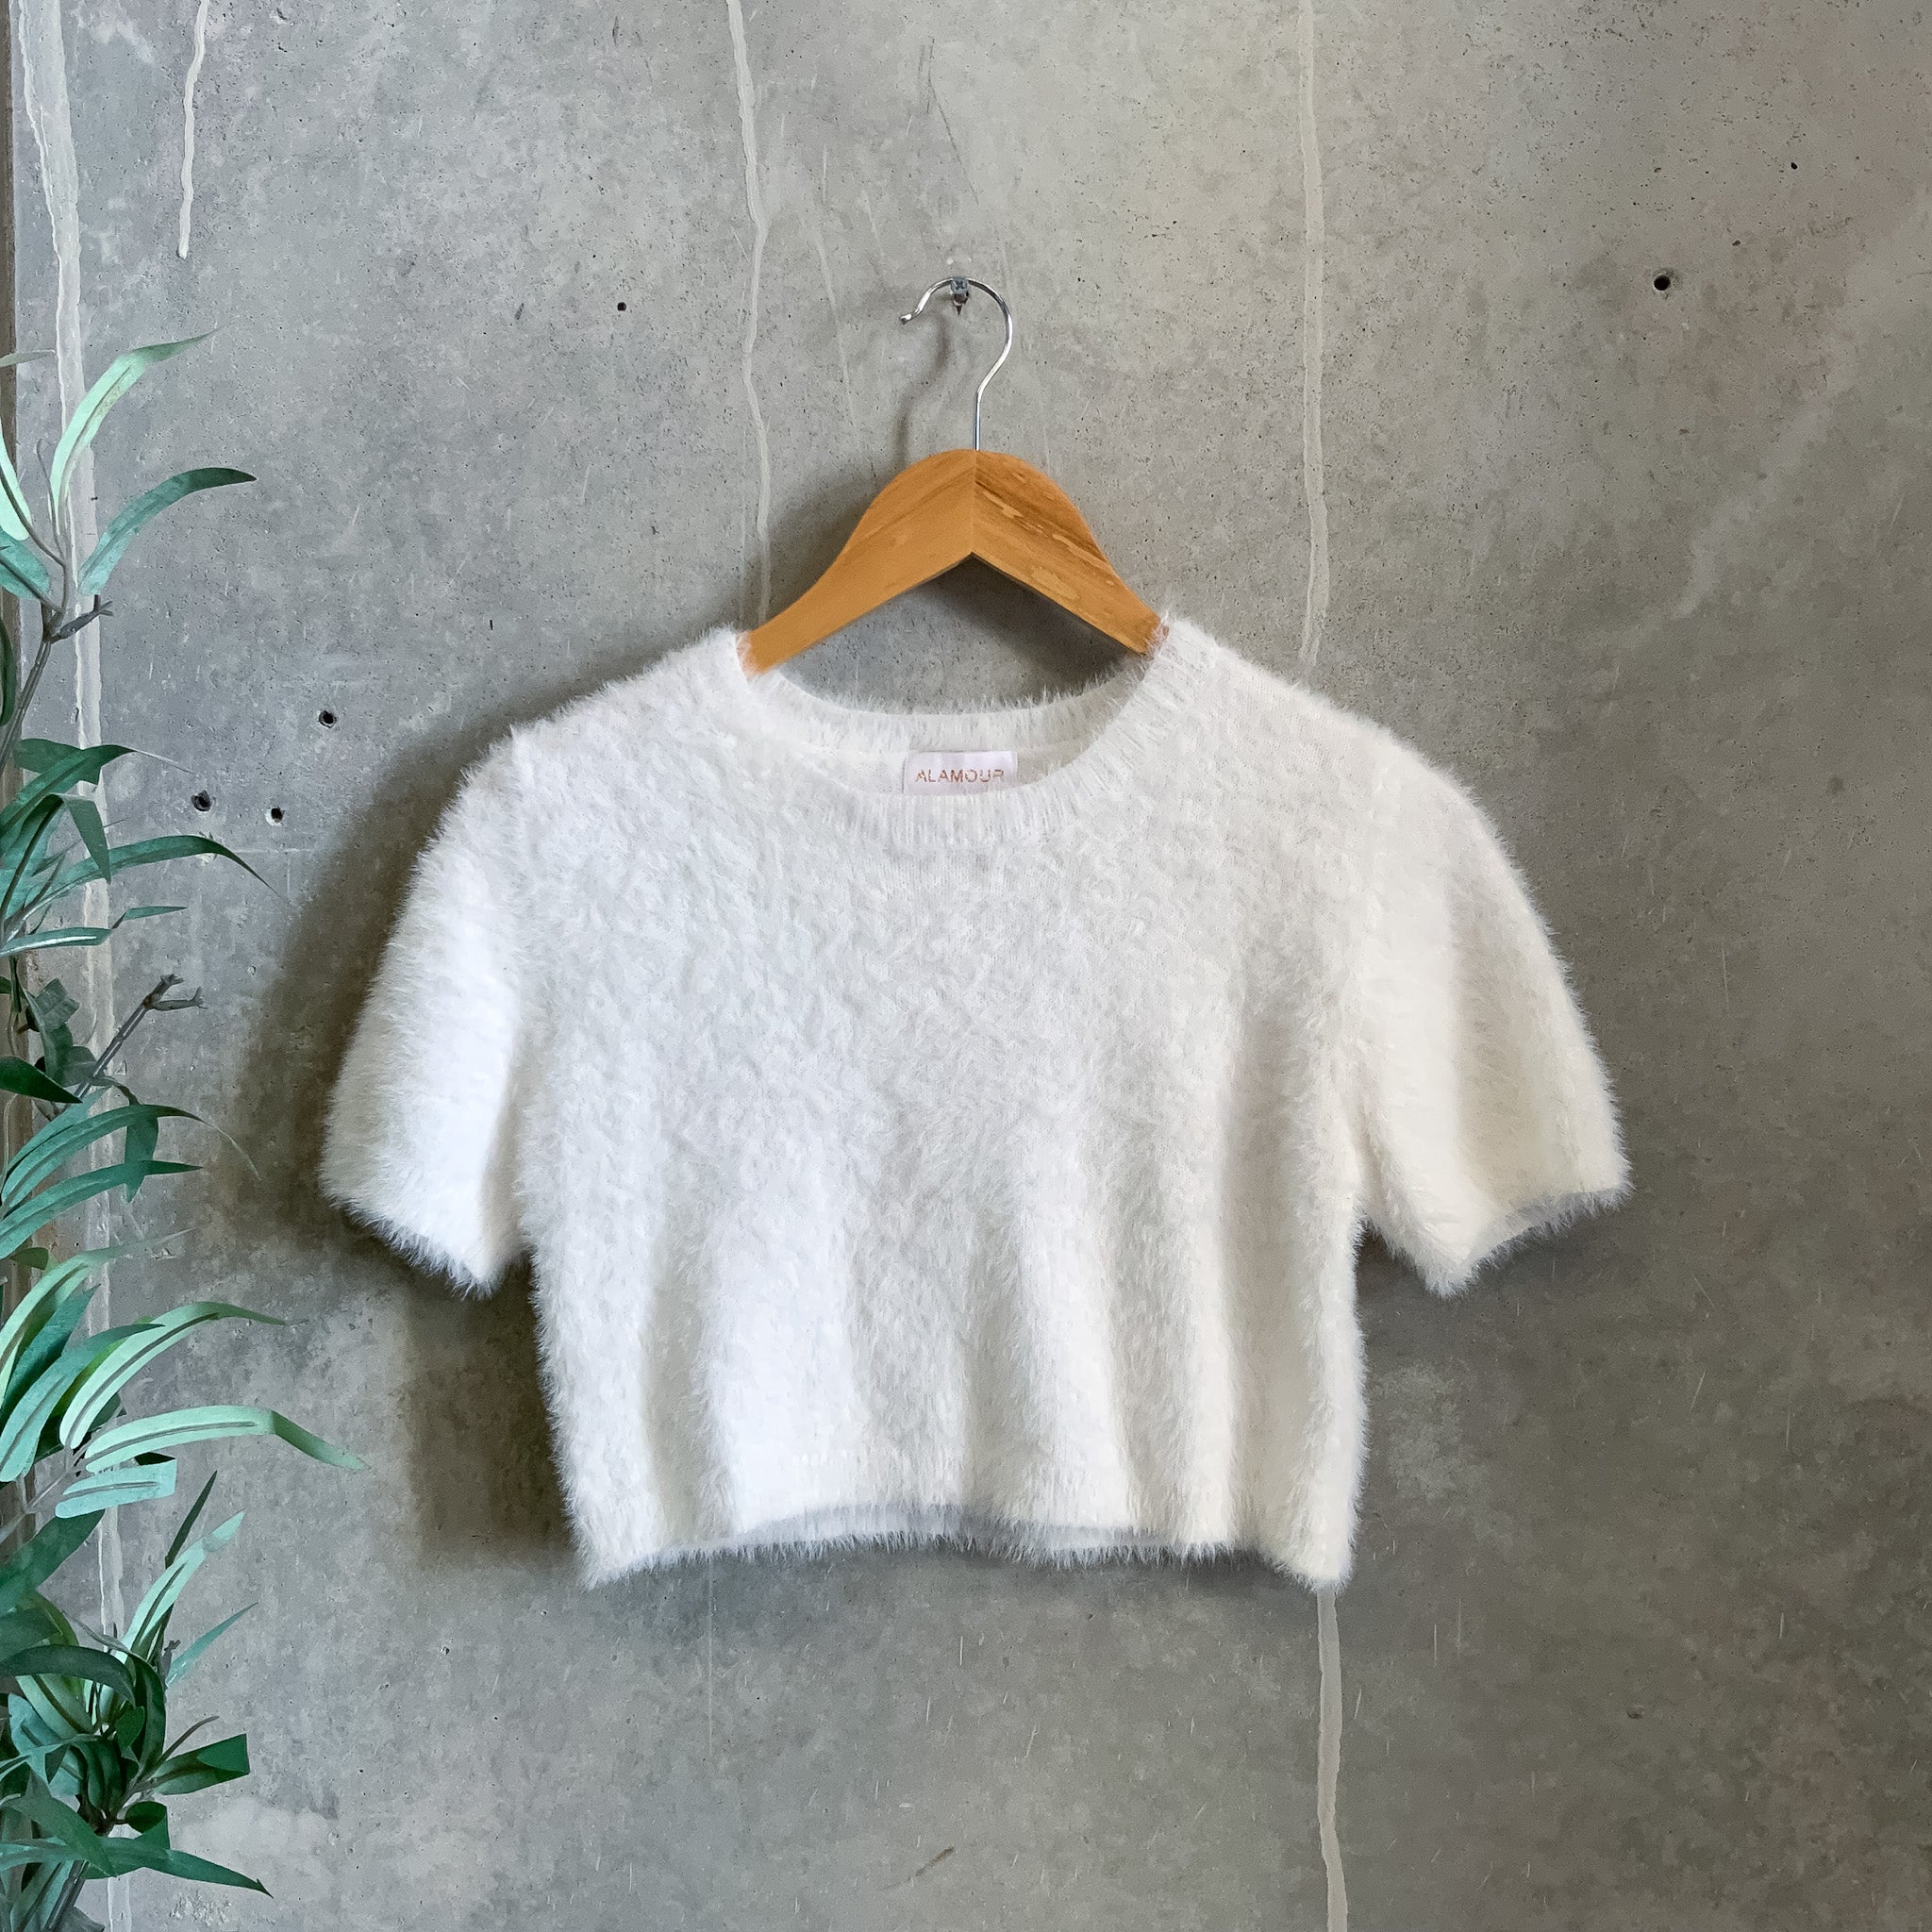 ALAMOUR White Crew Neck Short Sleeved Fluffy Knit Cropped Sweater/Top - Size M